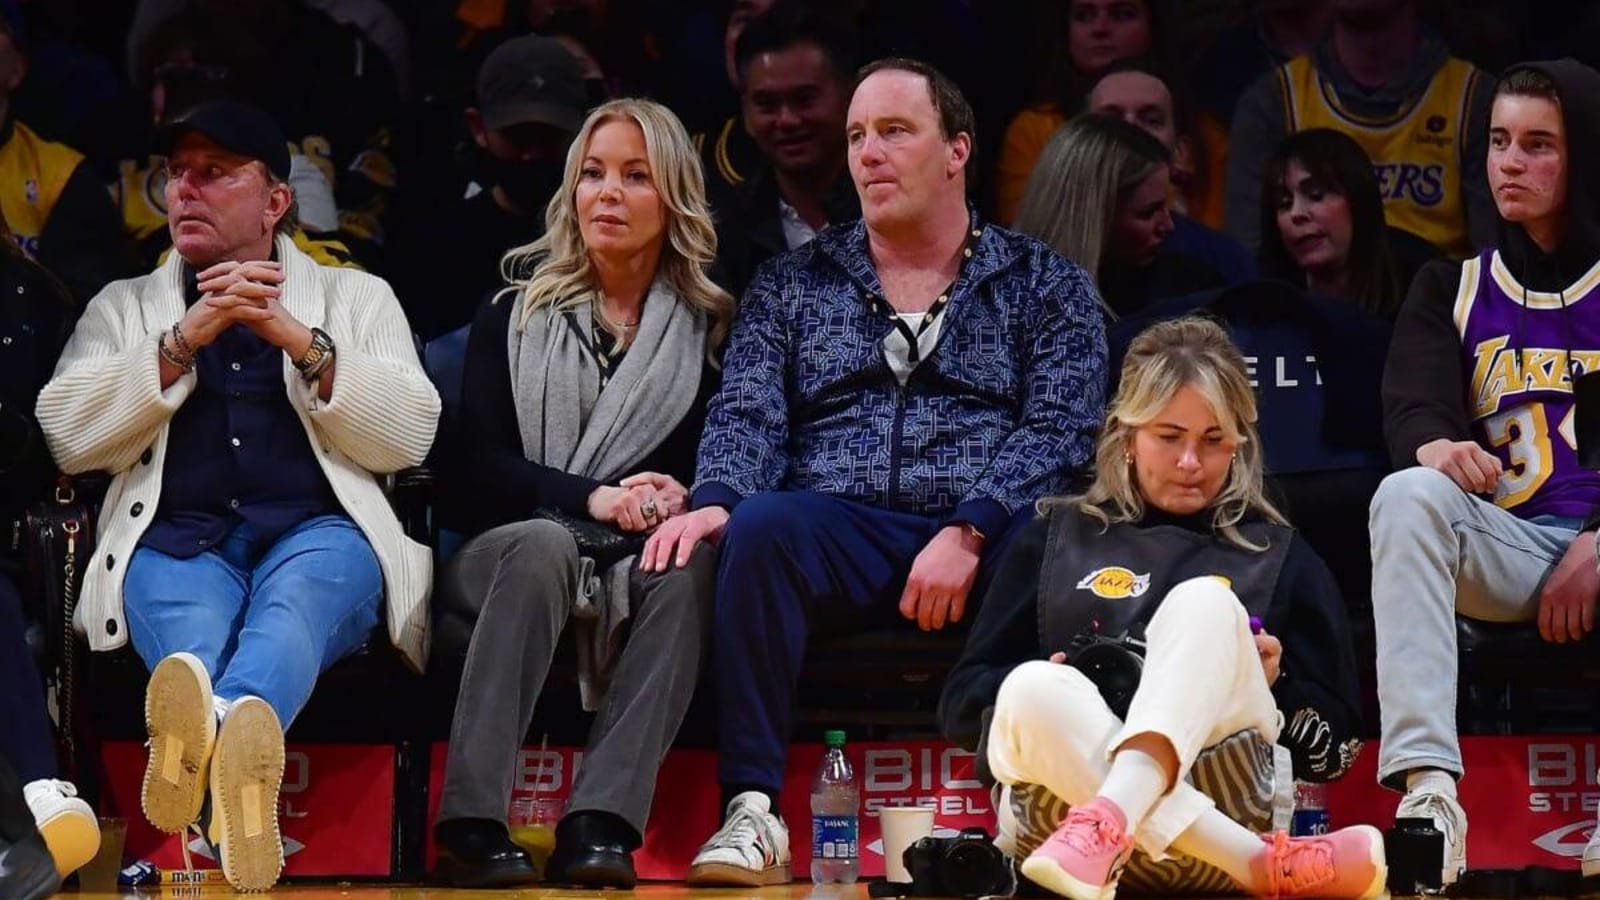  Jeanie Buss And Jay Mohr Are Taking Their Love To The Next Level... Stand-up Comedy